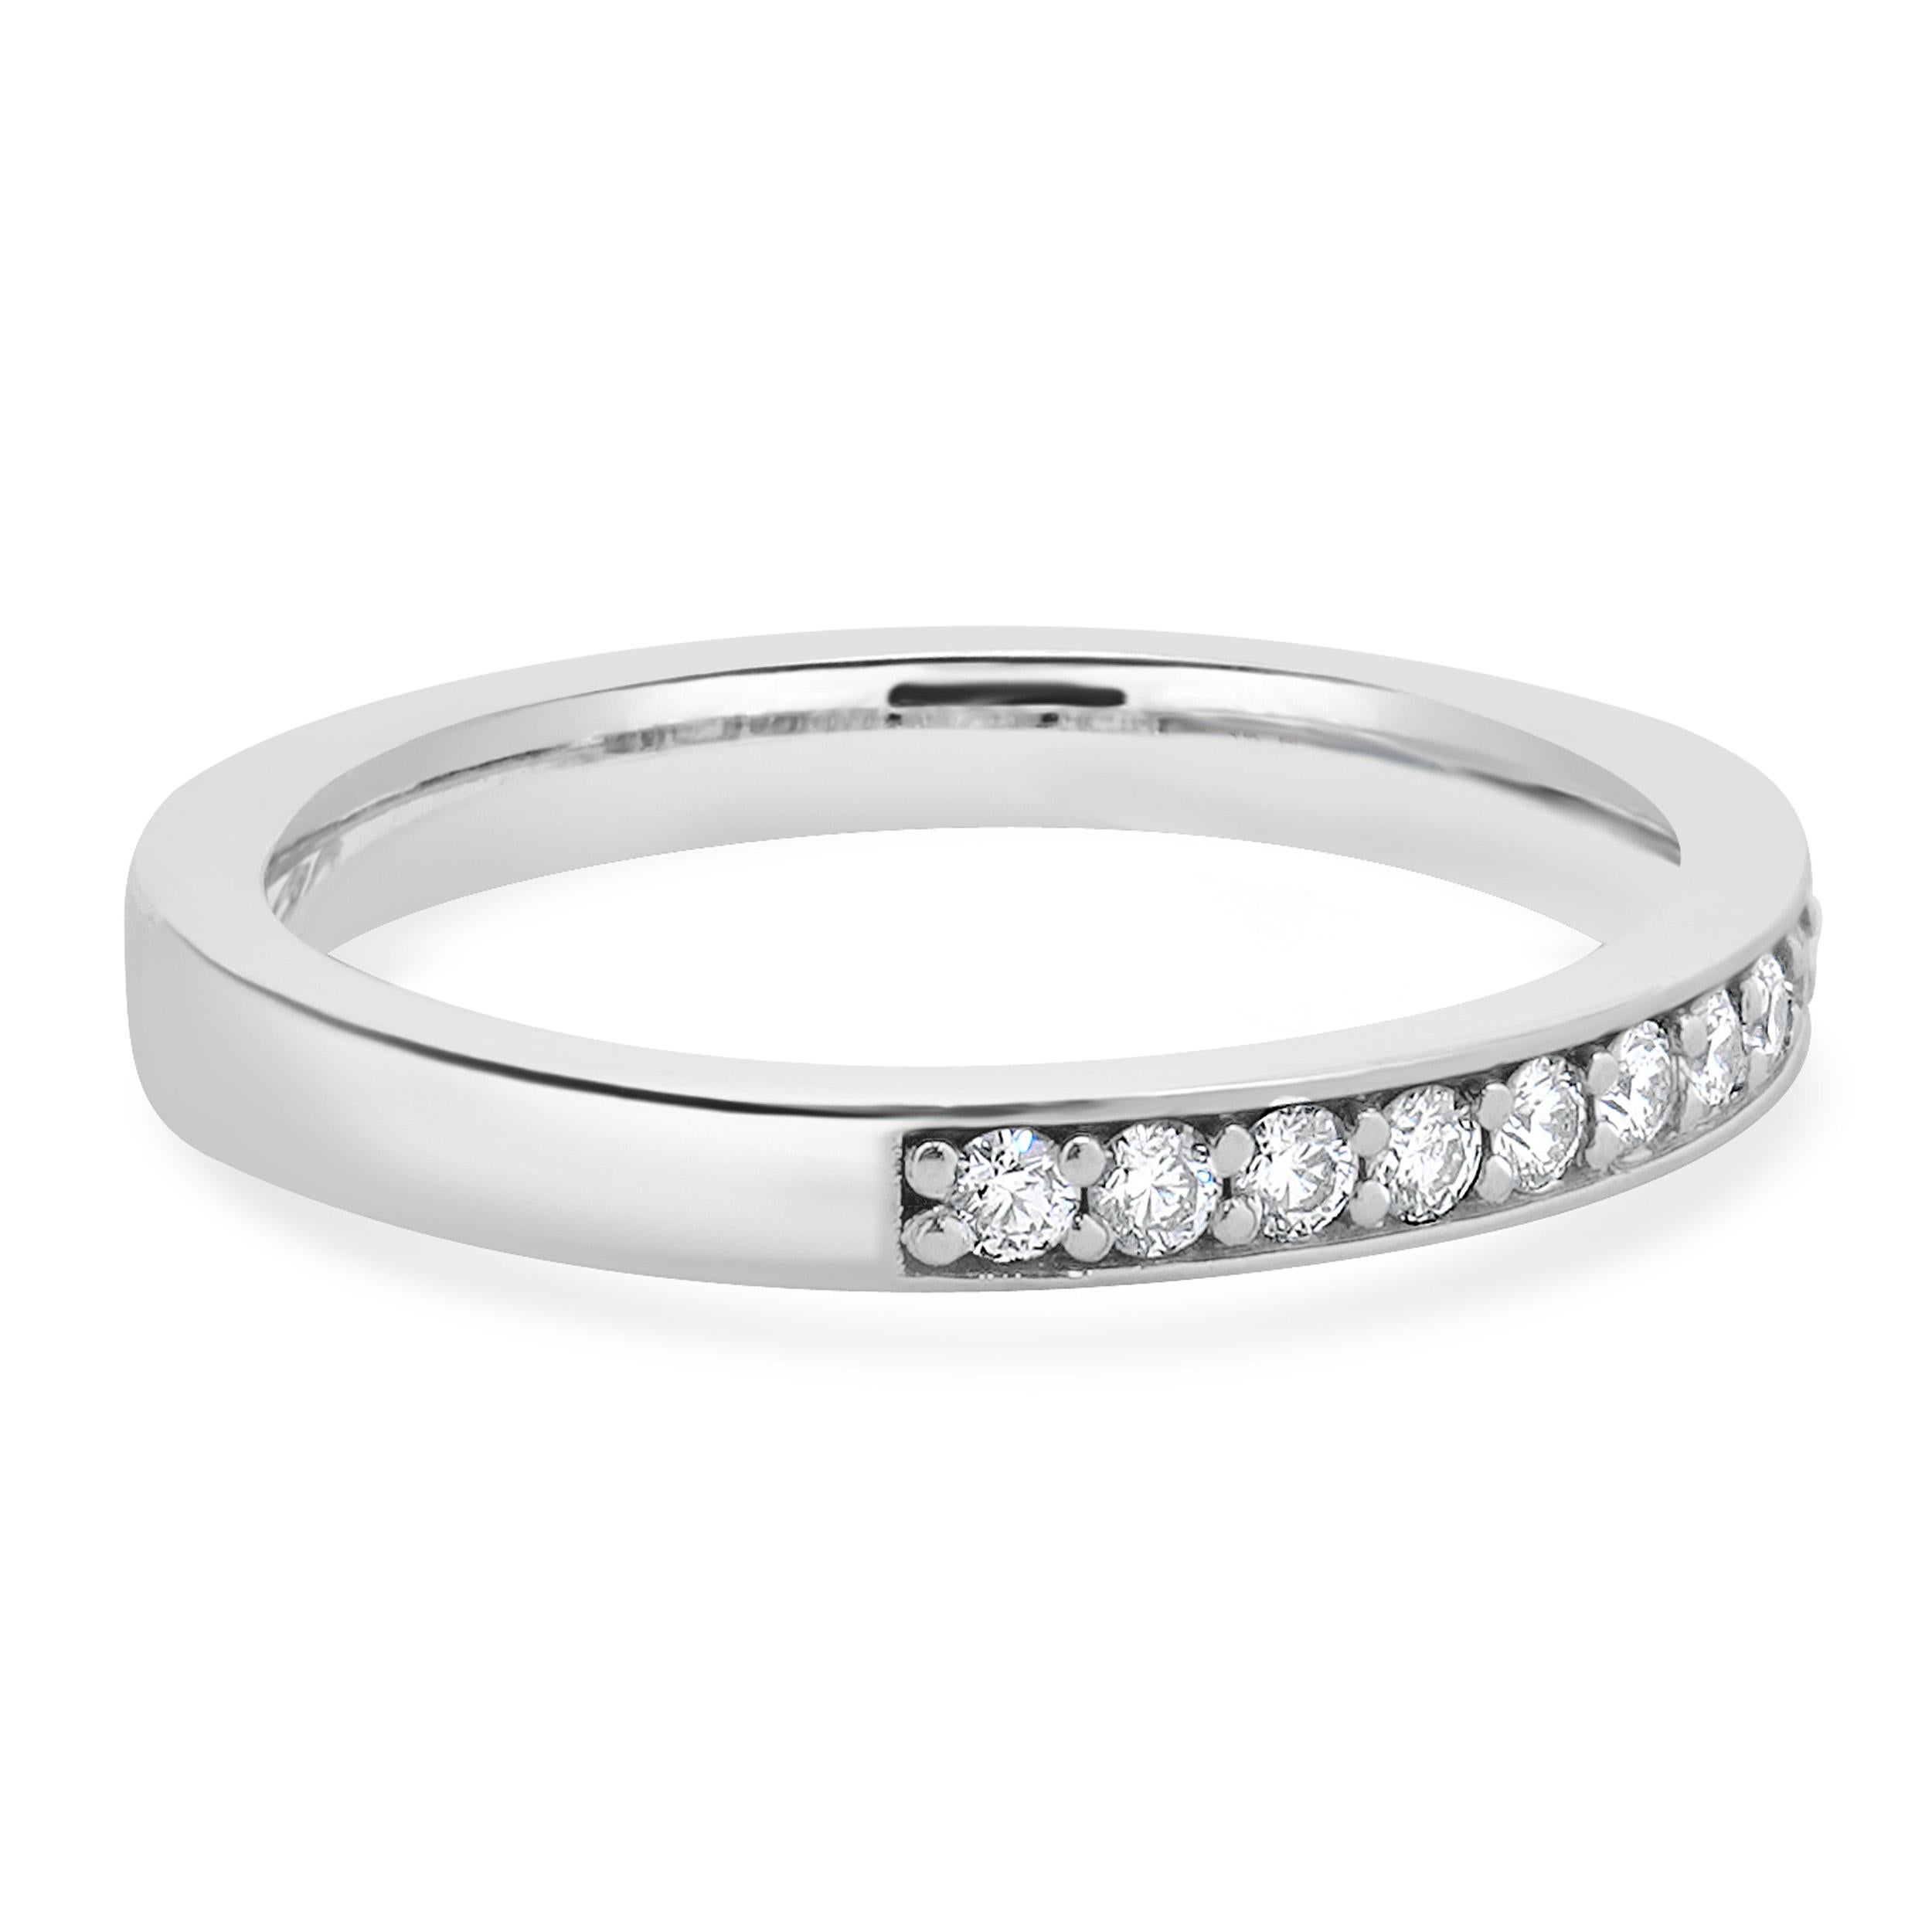 18 Karat White Gold Diamond Band In Excellent Condition For Sale In Scottsdale, AZ